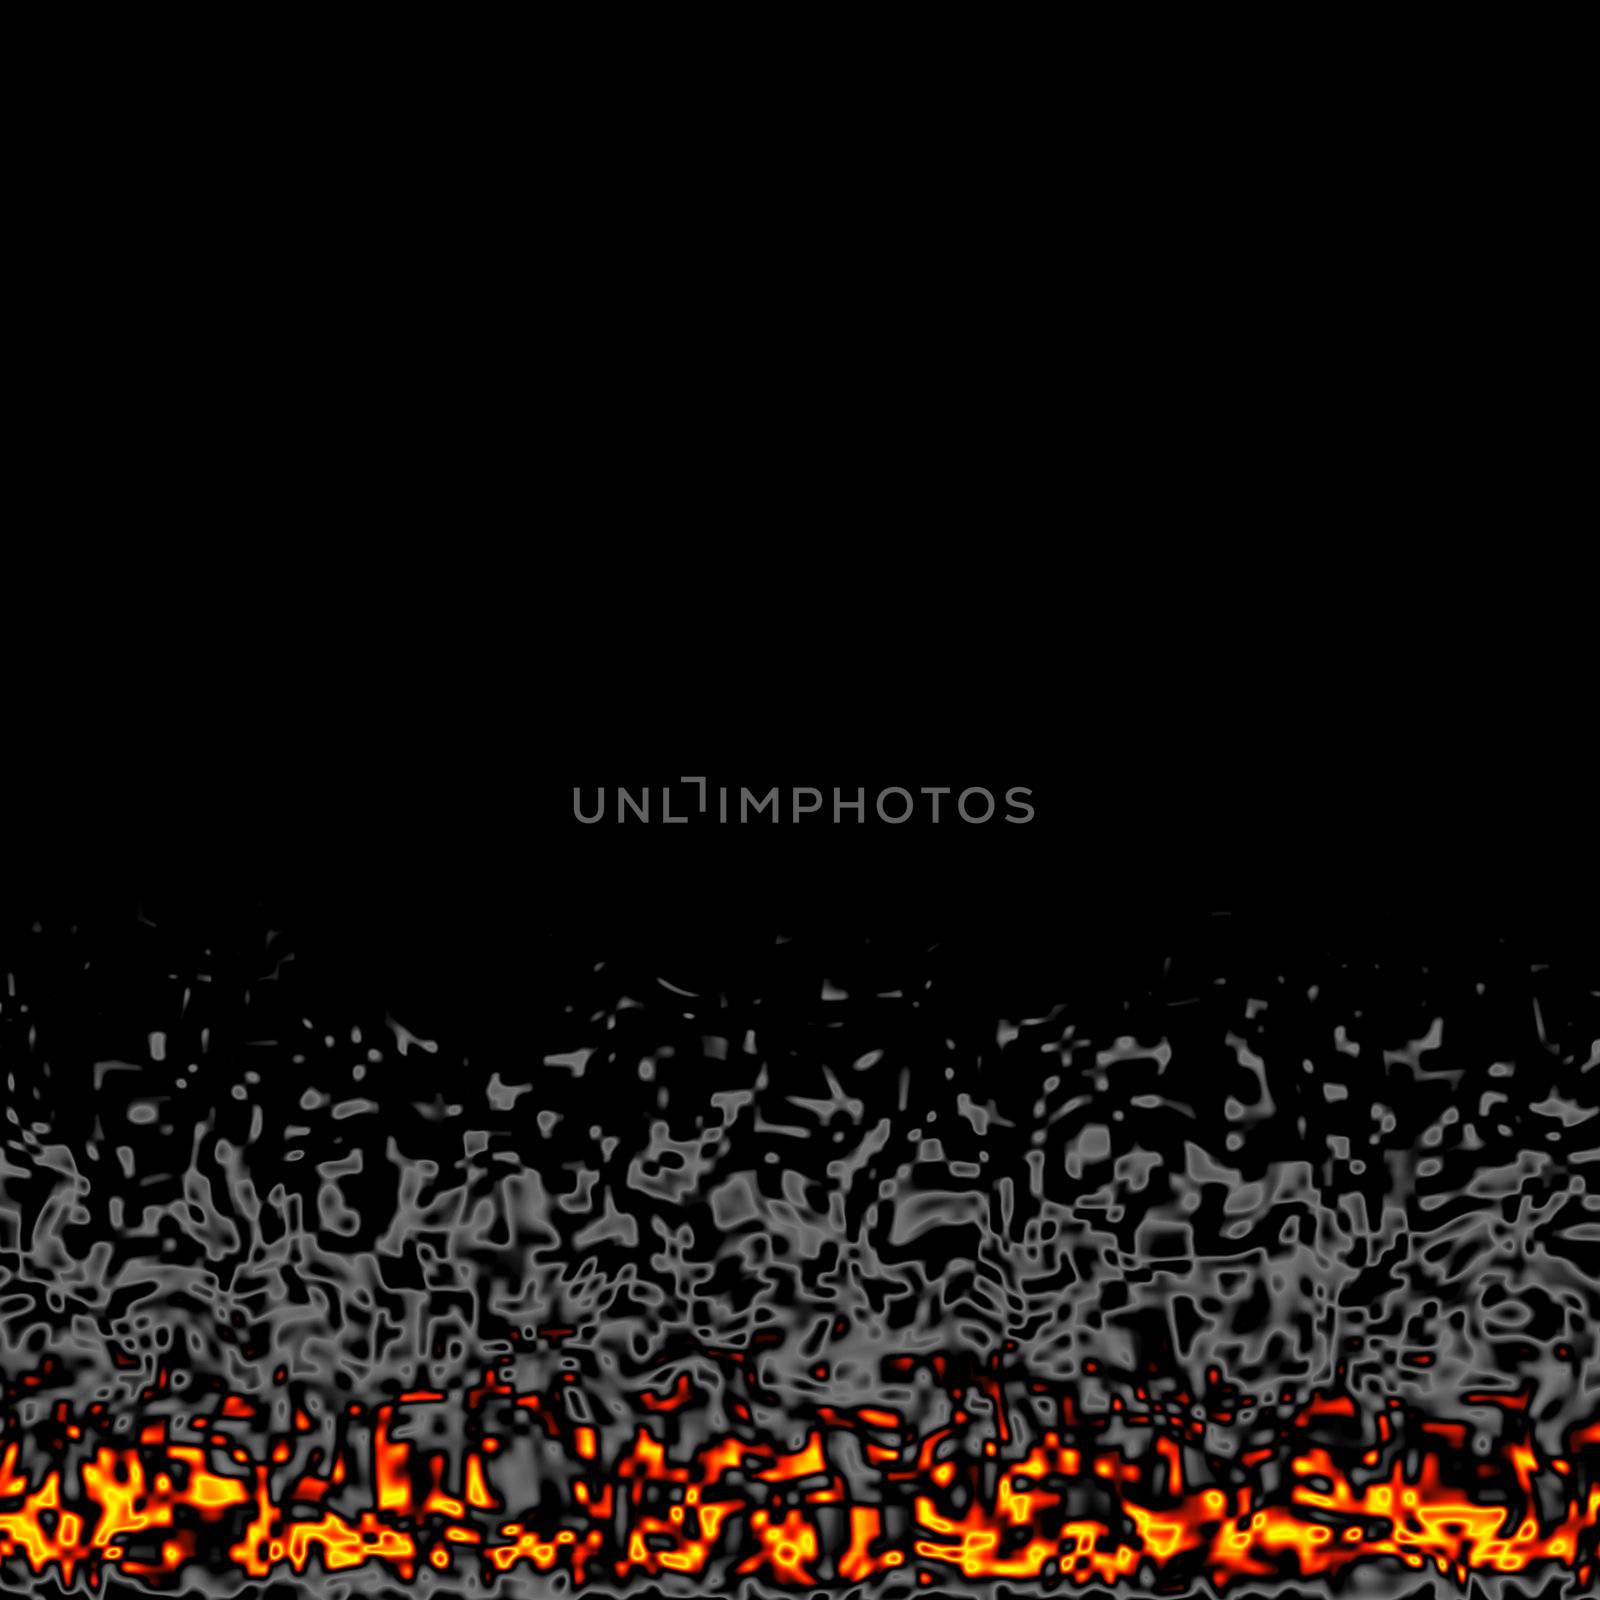 An abstract illustration representing a stylized bed of glowing coals.